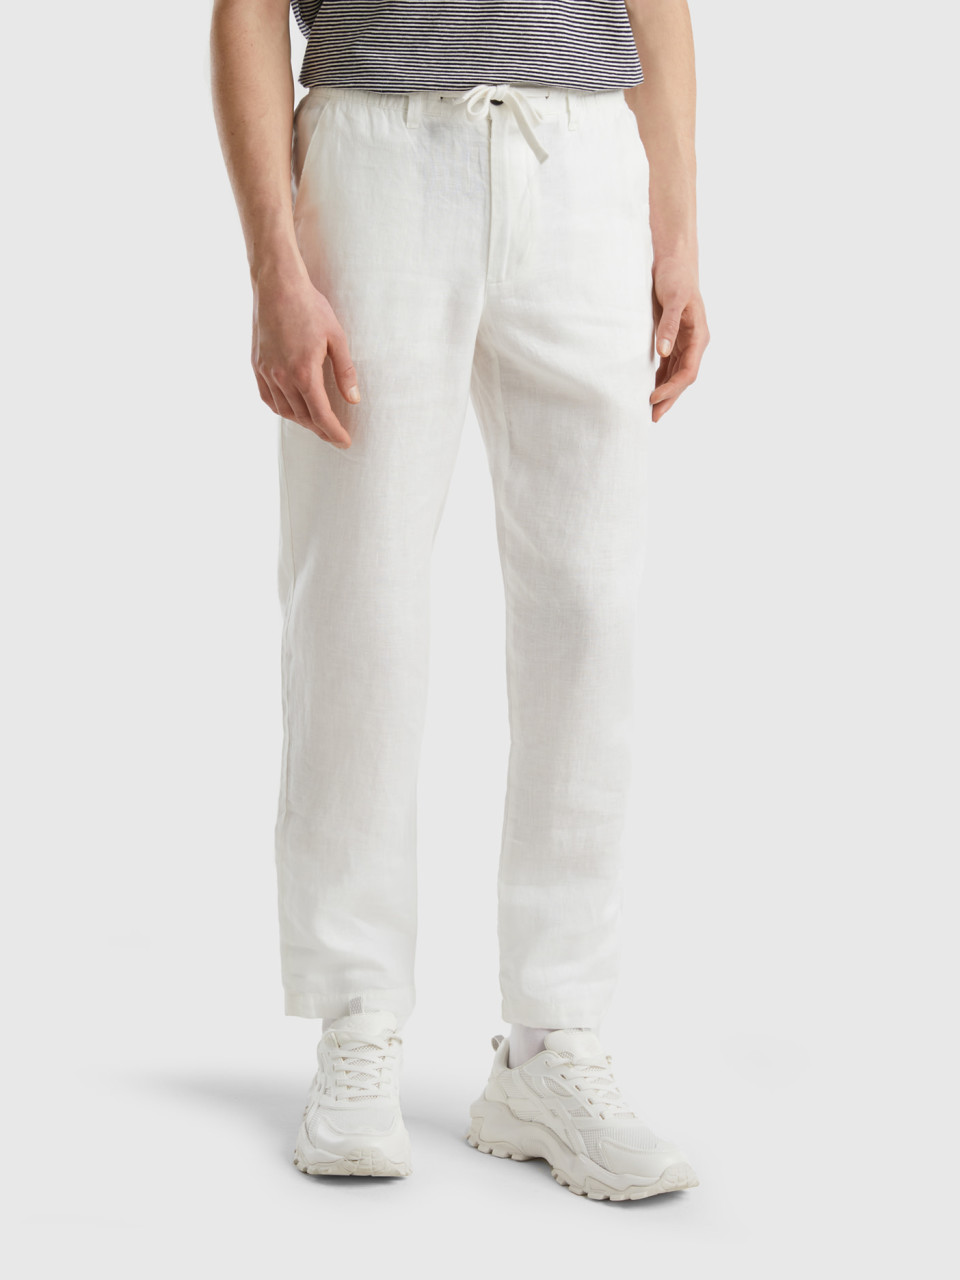 Benetton, Trousers In Pure Linen With Drawstring, Creamy White, Men